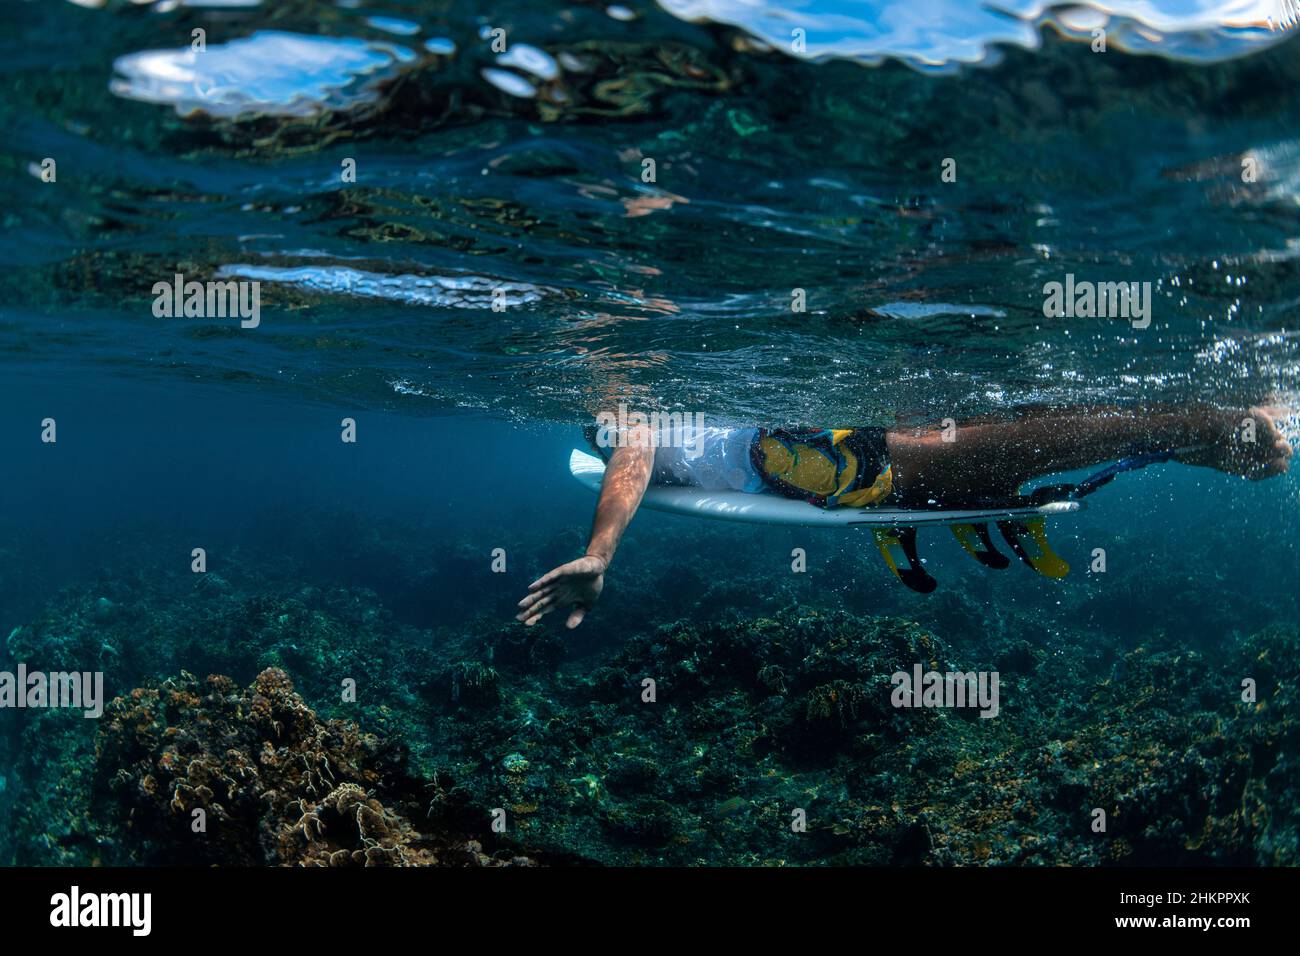 Underwater view of surfer on surfboard in clear sea Stock Photo